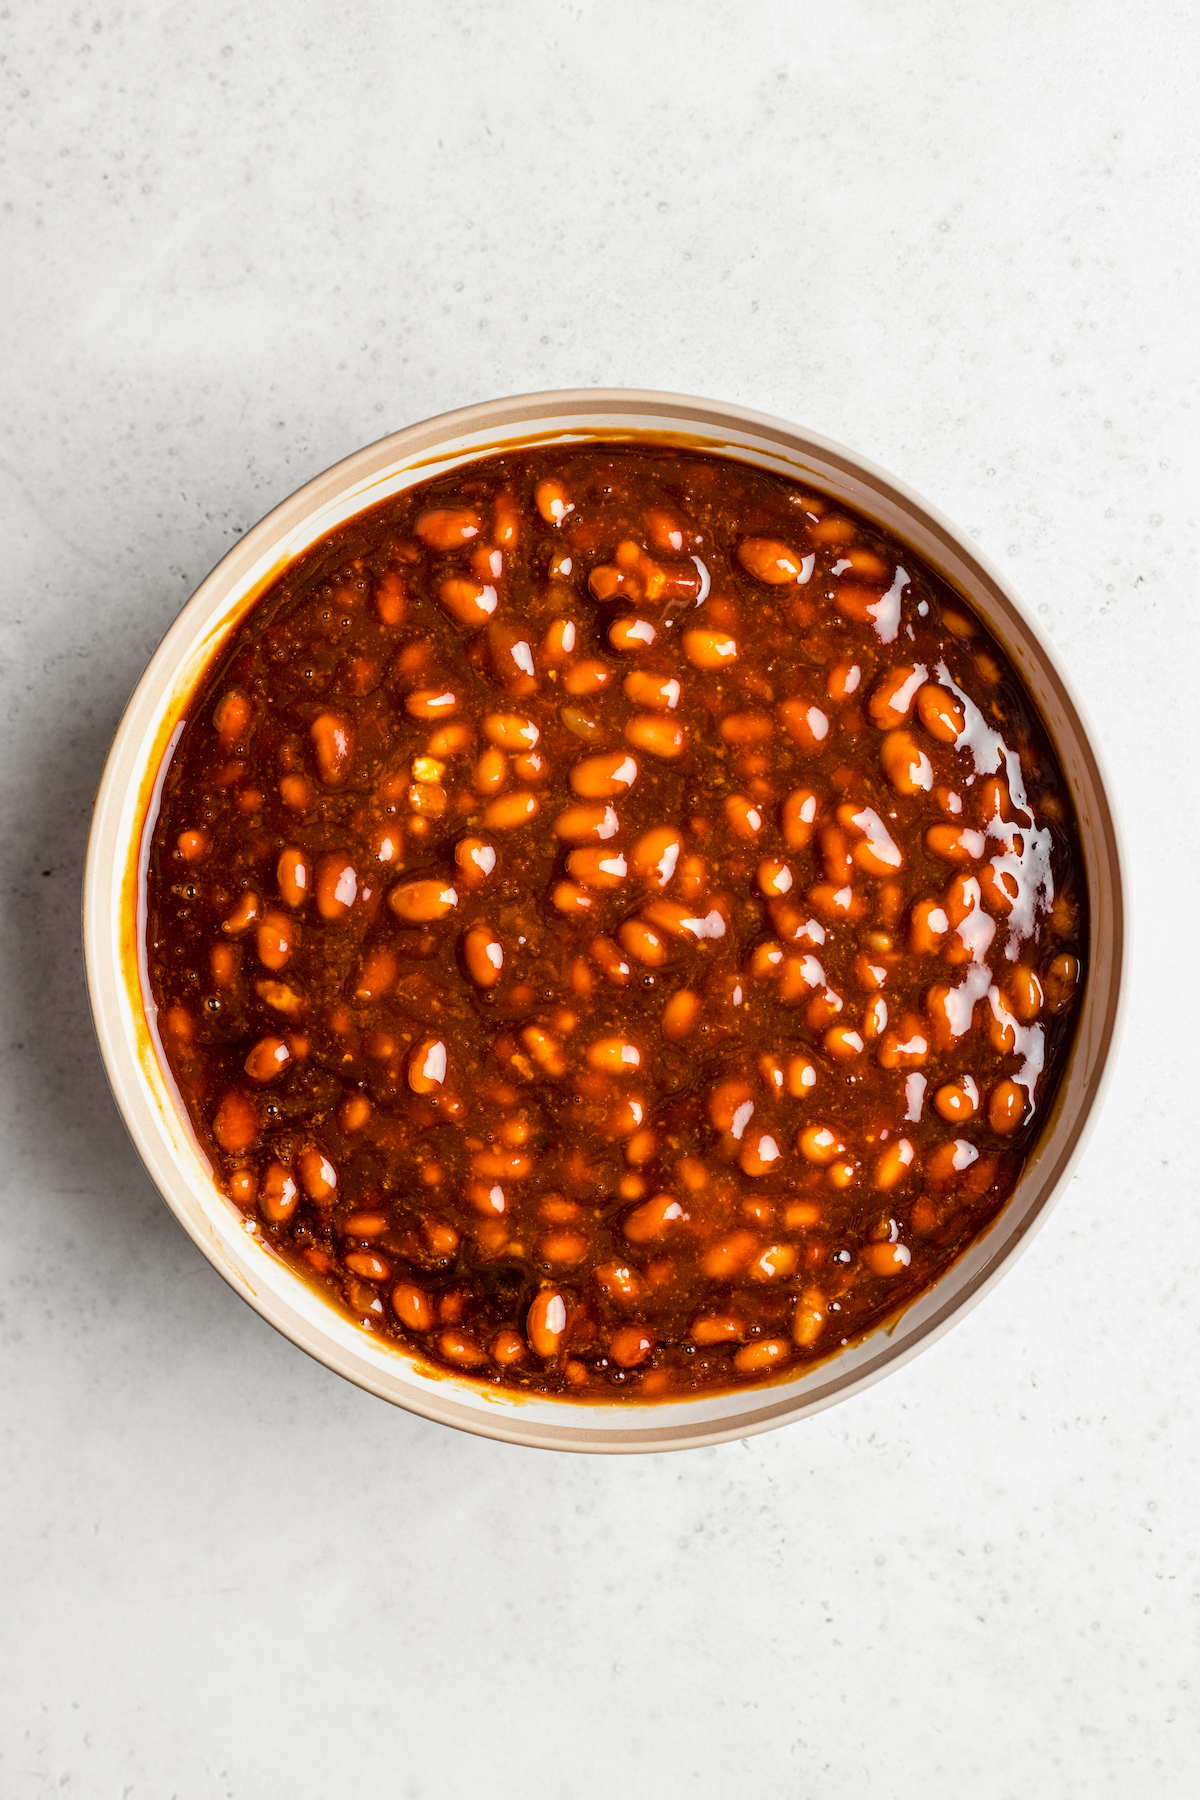 A bowl of dark, saucy baked beans.